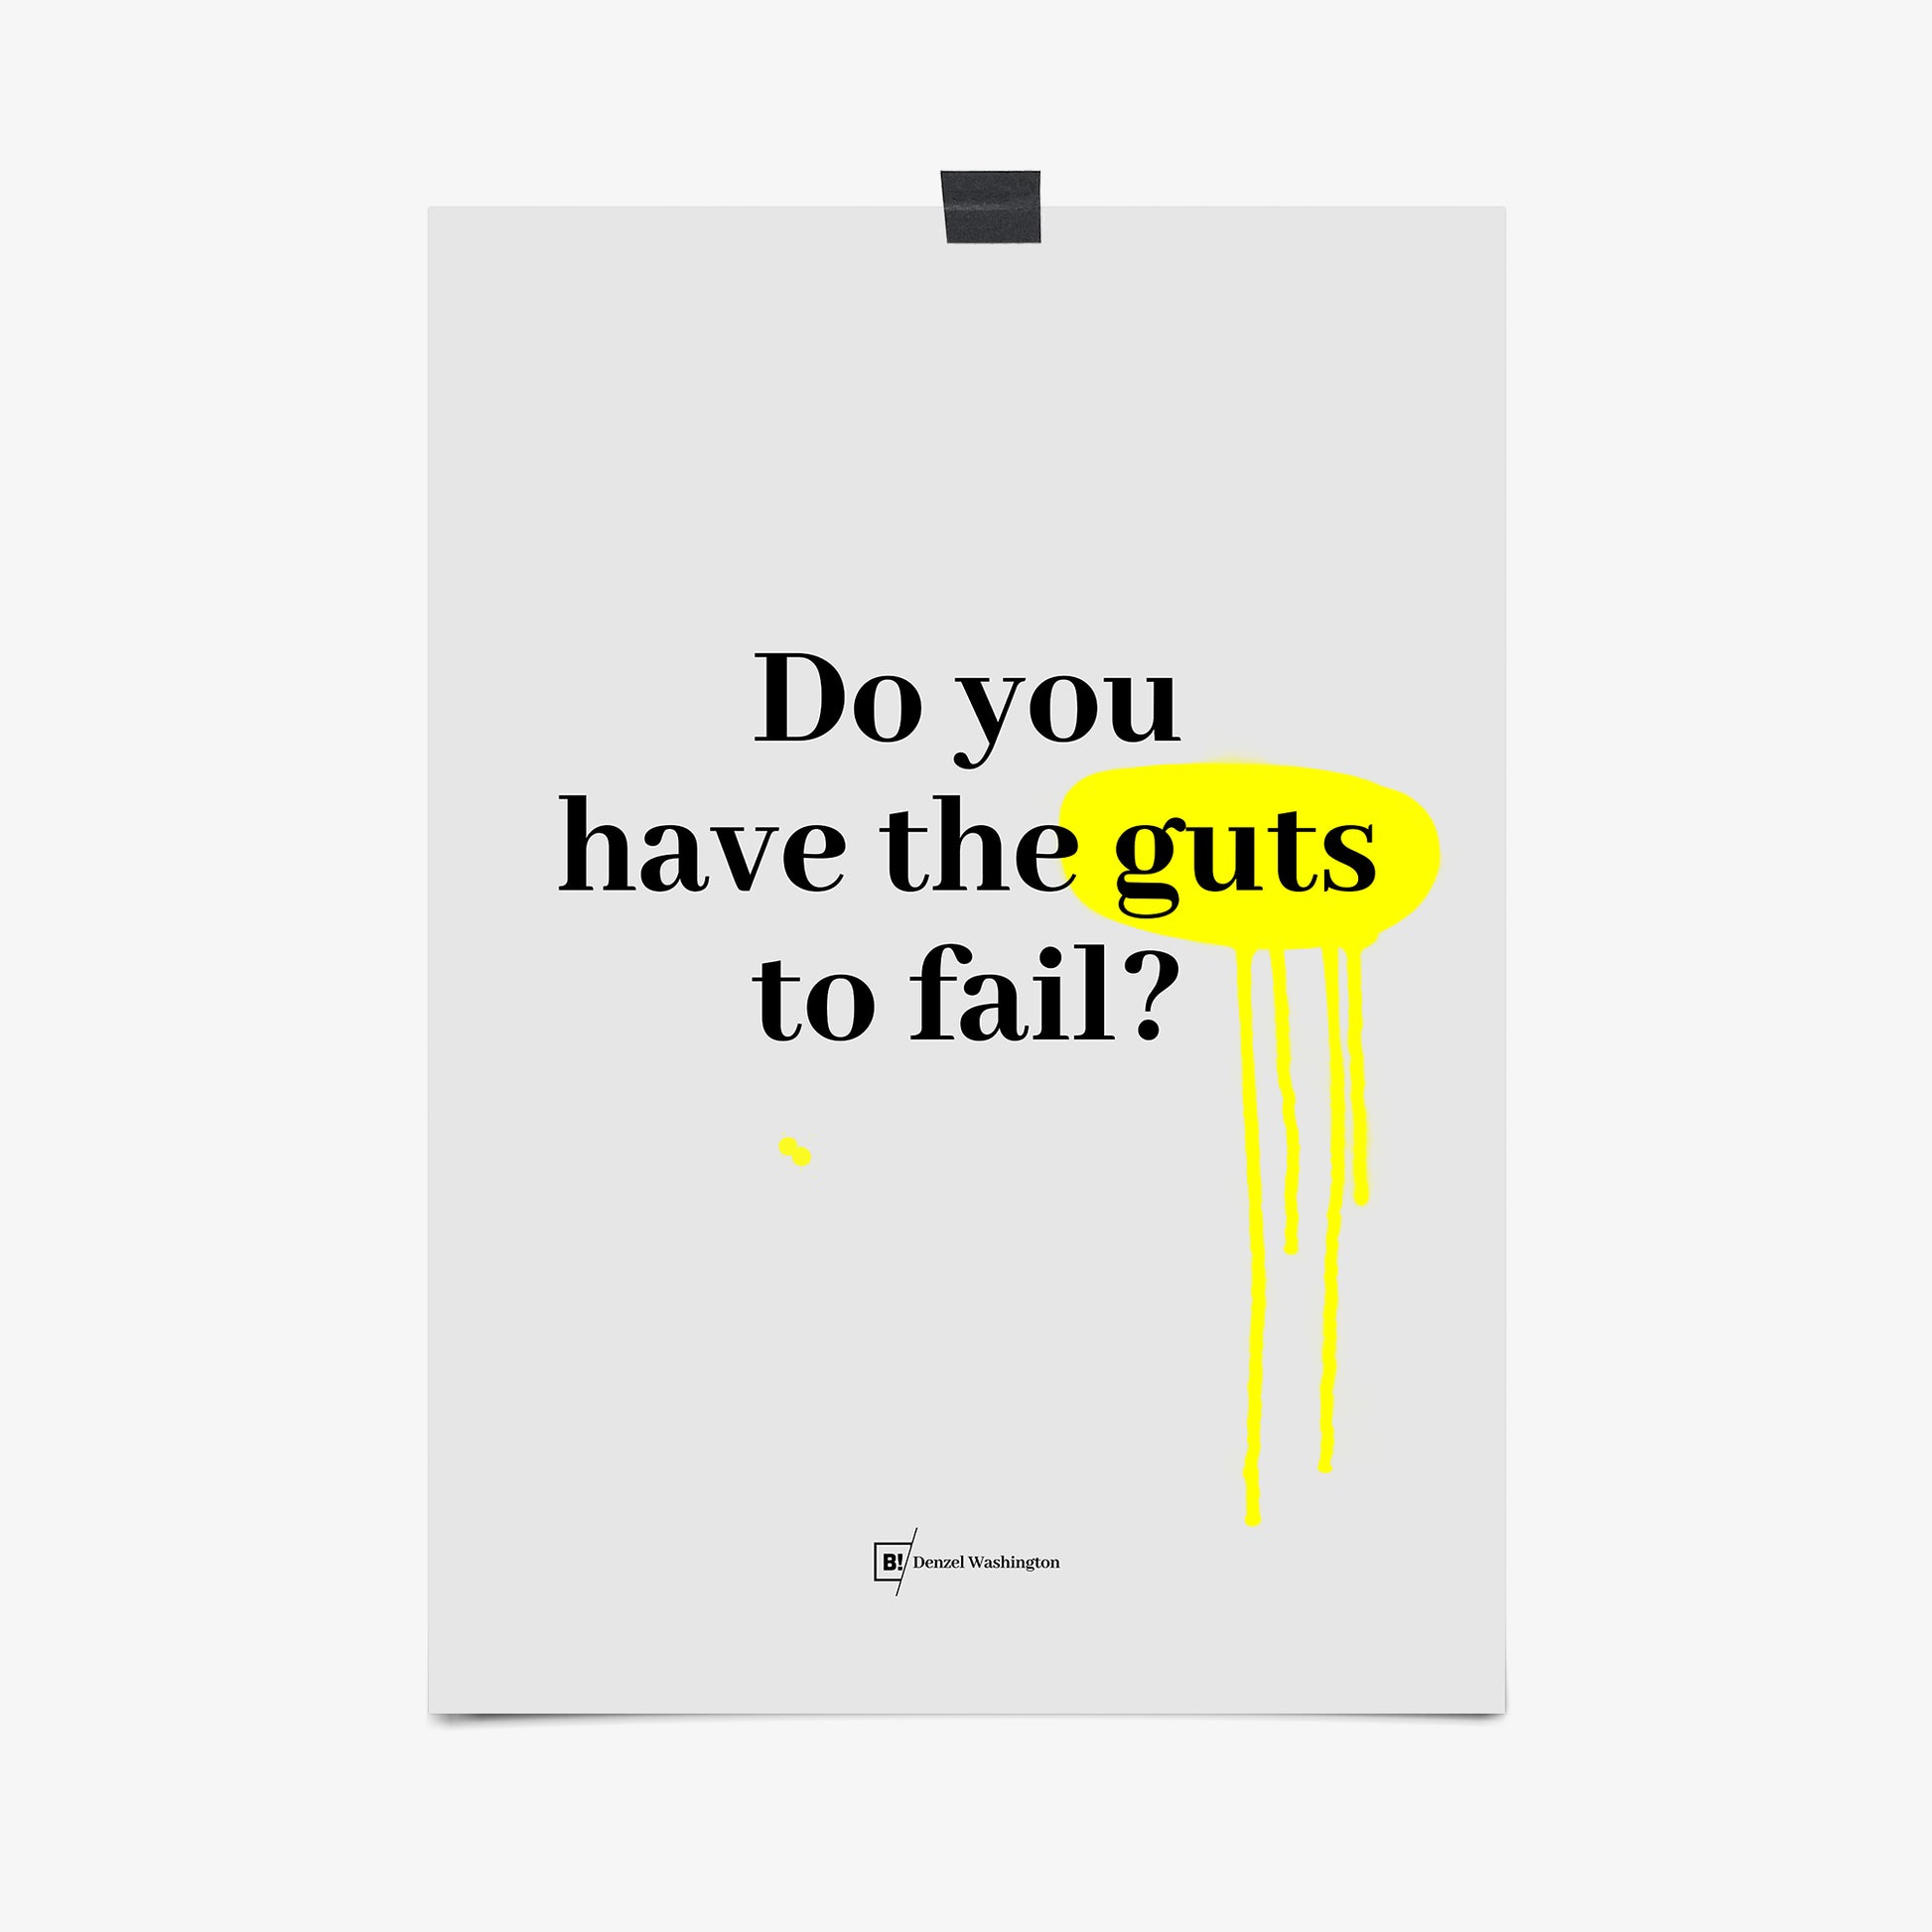 Be inspired by Denzel Washington's famous "Do you have the guts to fail?" quote art print. This artwork was printed using the giclée process on archival acid-free paper that captures its timeless beauty in every detail.